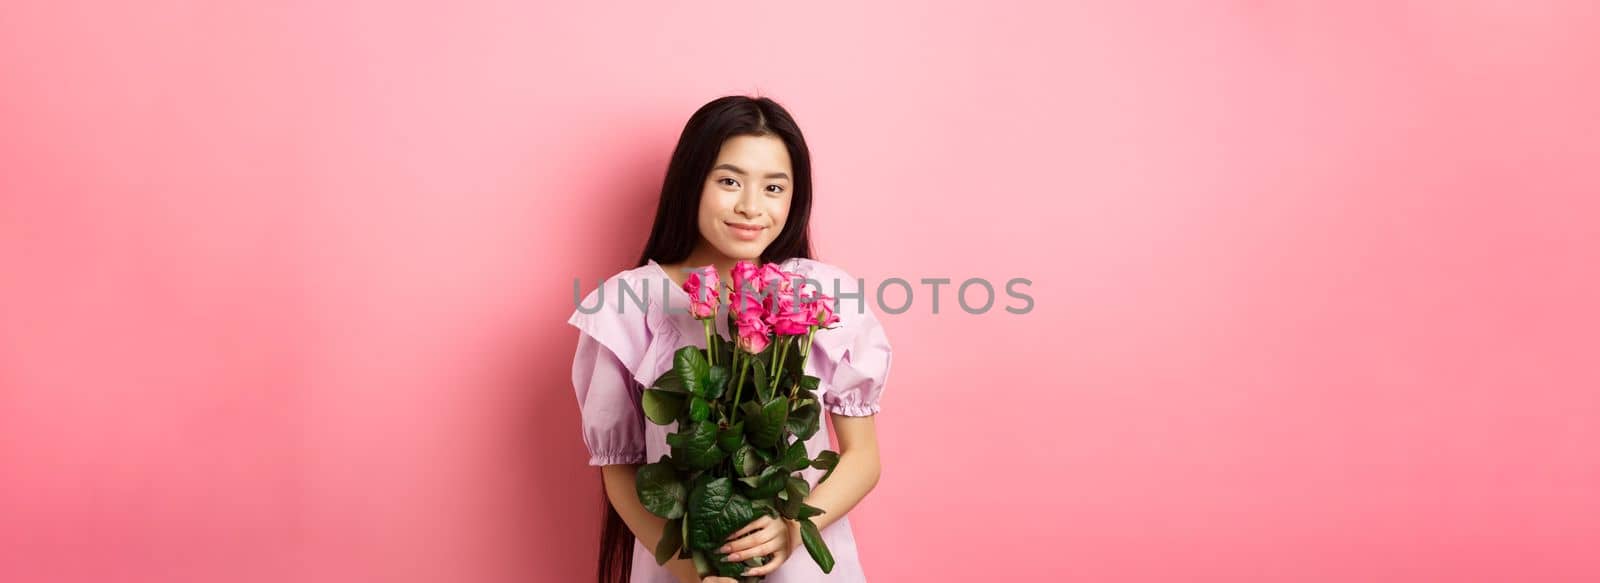 Romantic tender asian girl holding bouquet of roses, smiling cute at camera, having valentines date with lover, wearing dress, pink background.